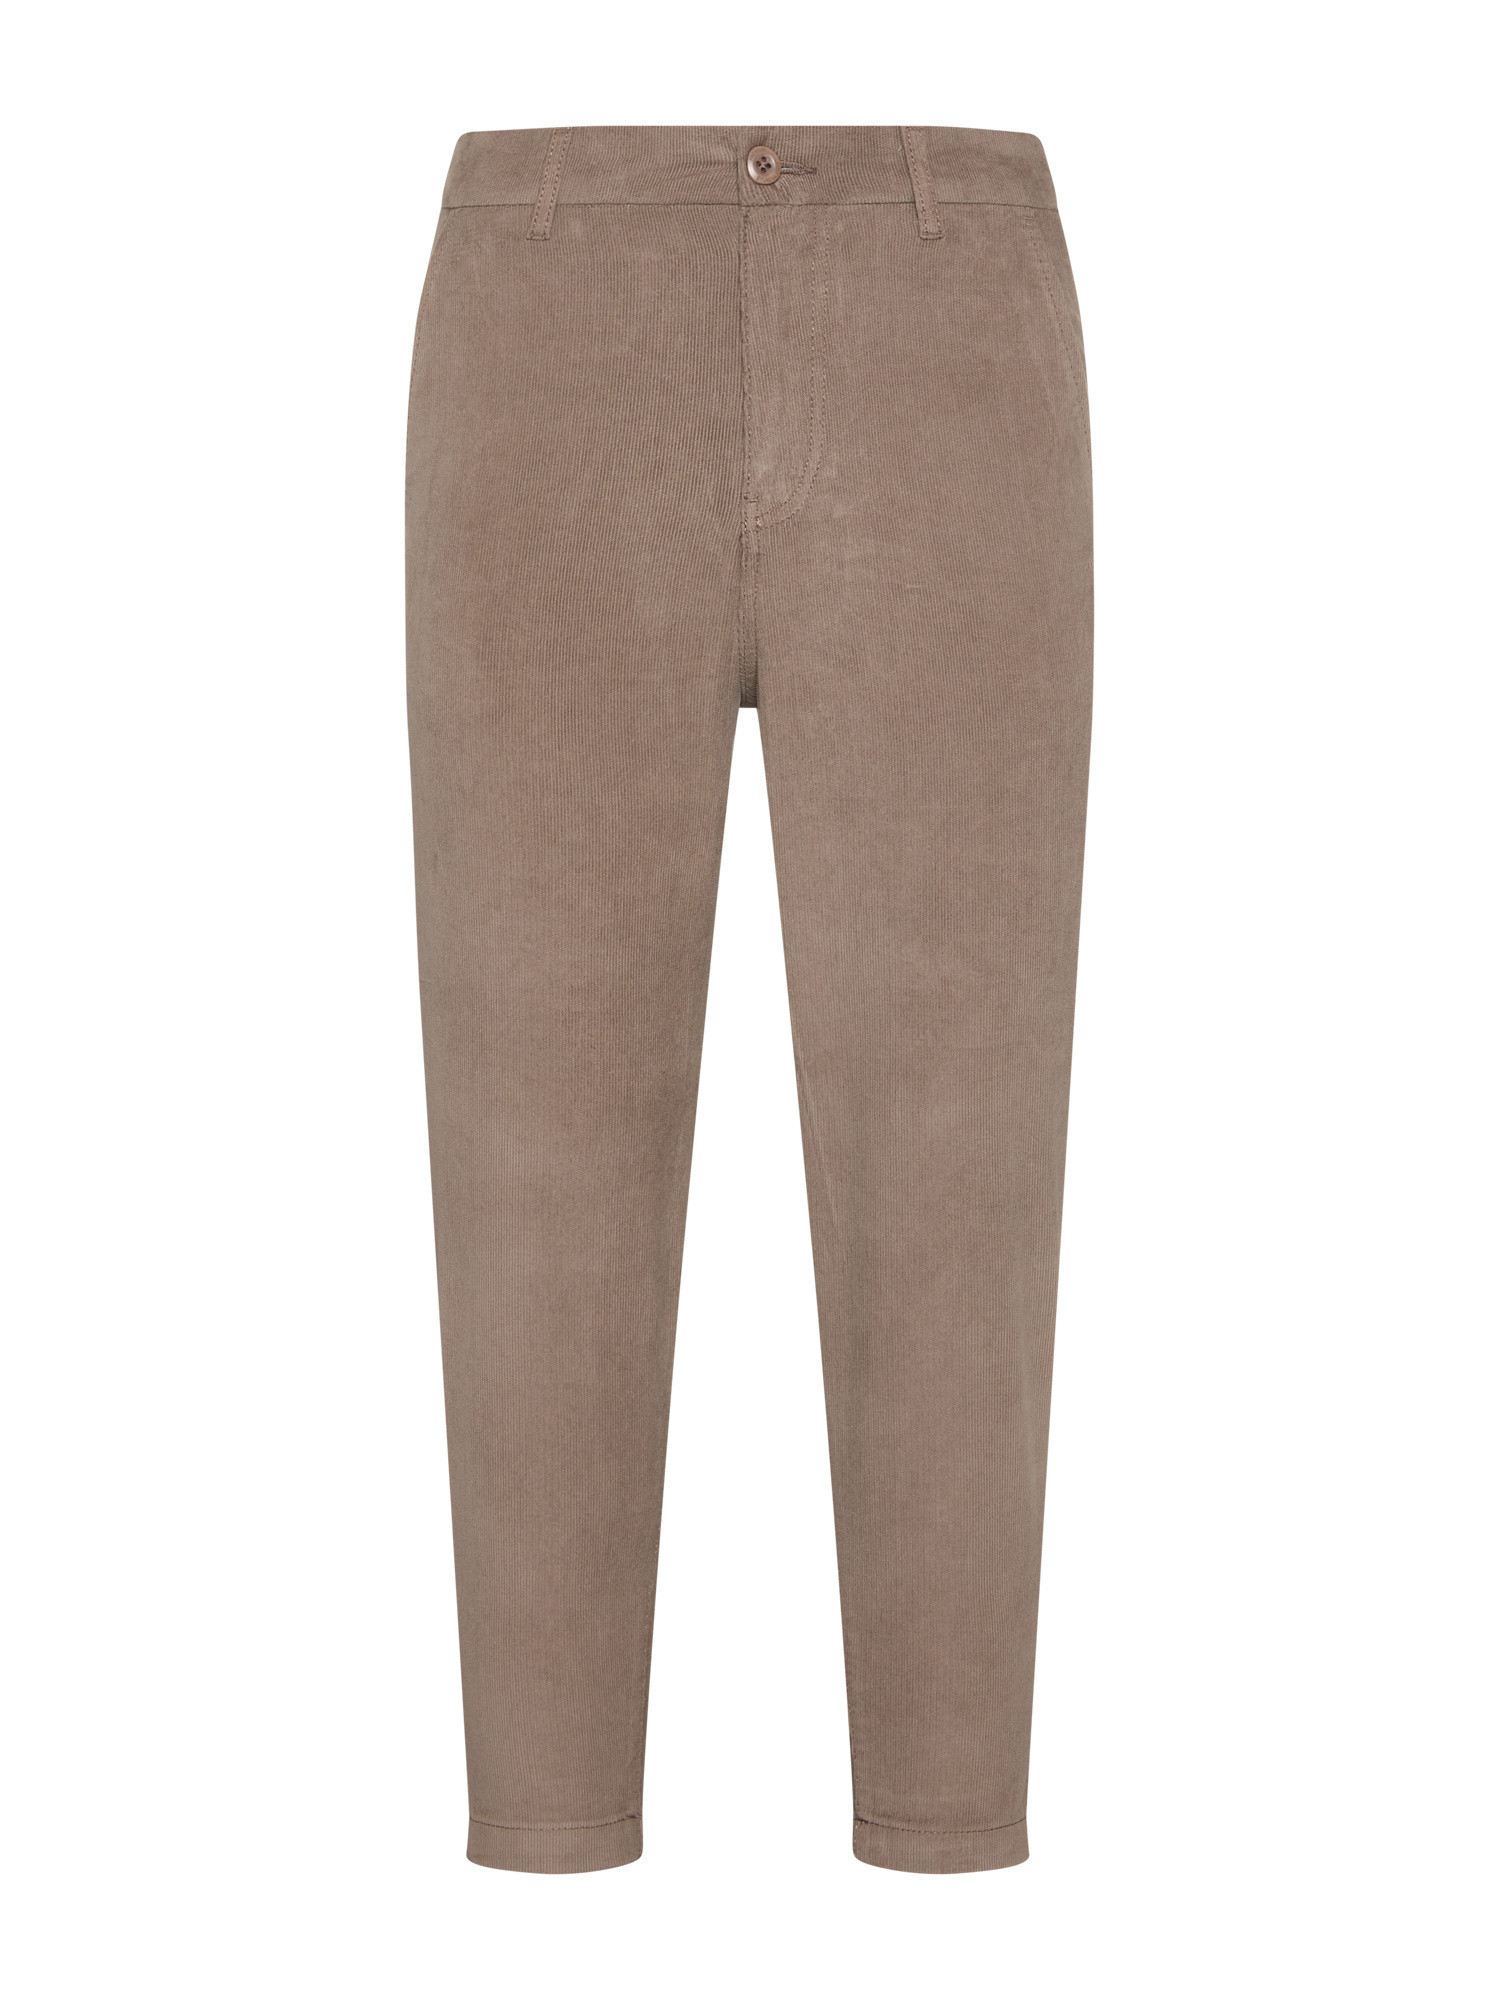 Jack & Jones - Loose fit cotton chino trousers, Beige, large image number 0